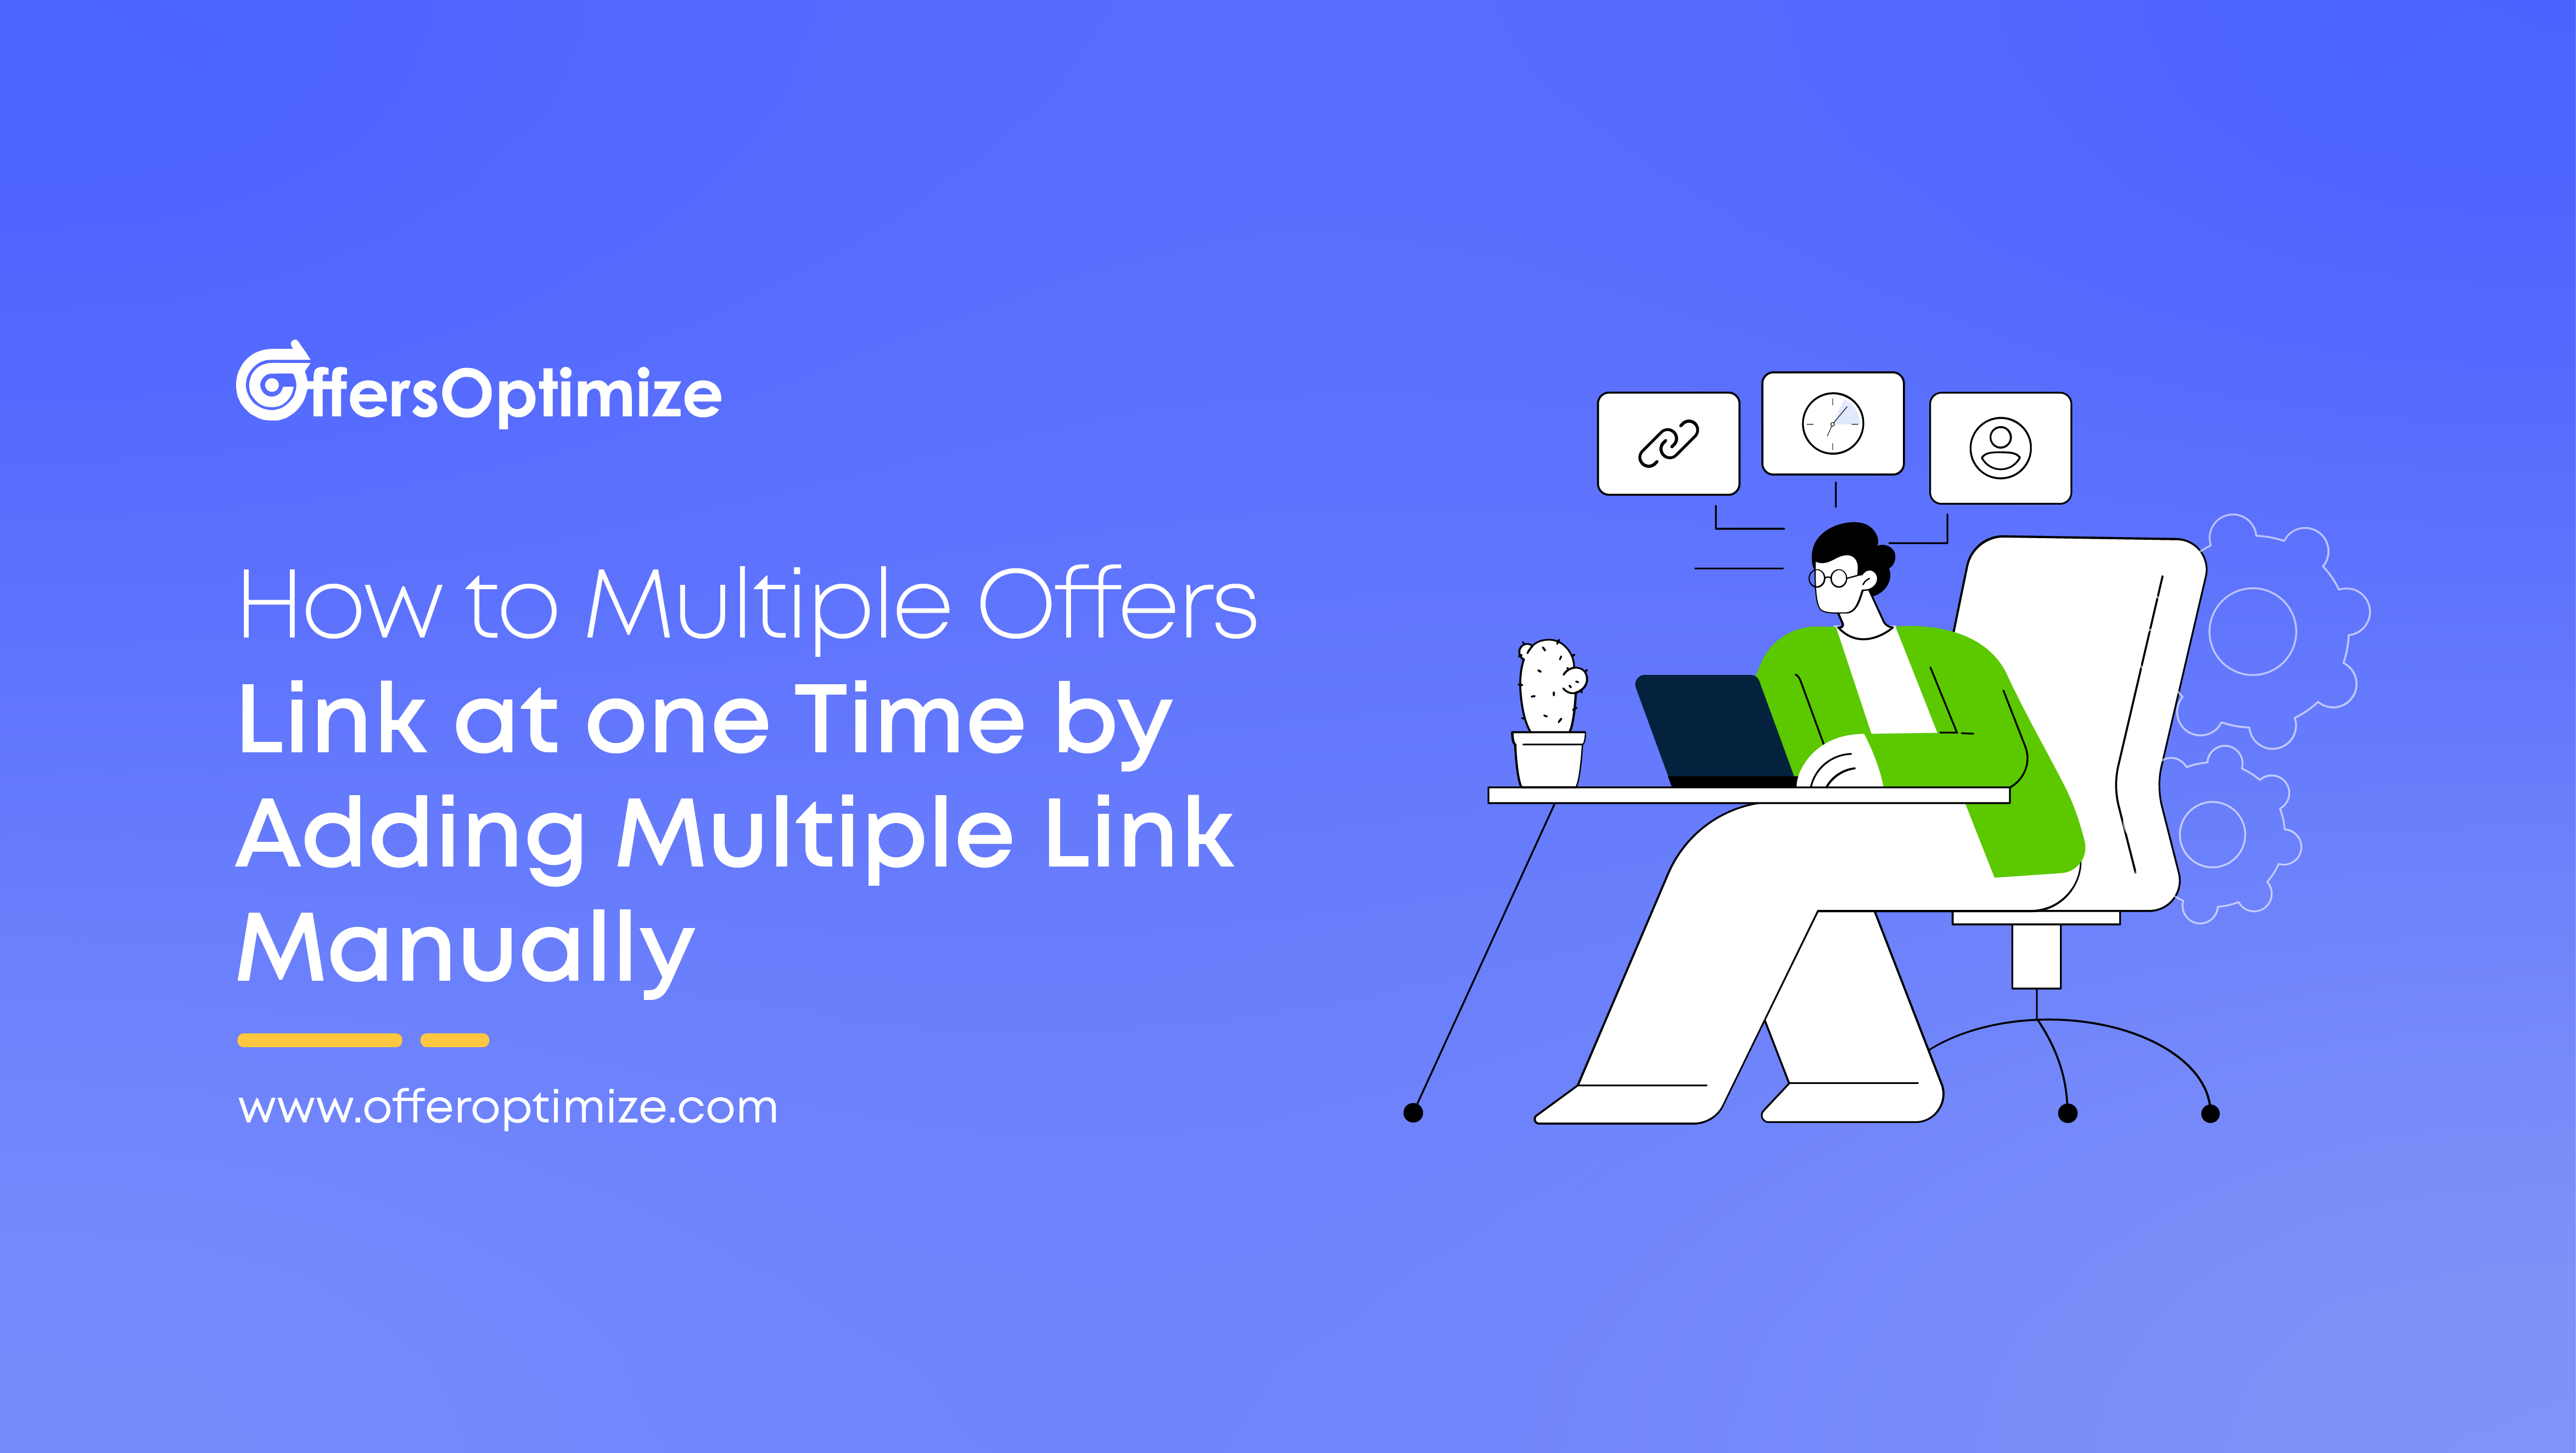 How to check multiple offers using multiple links